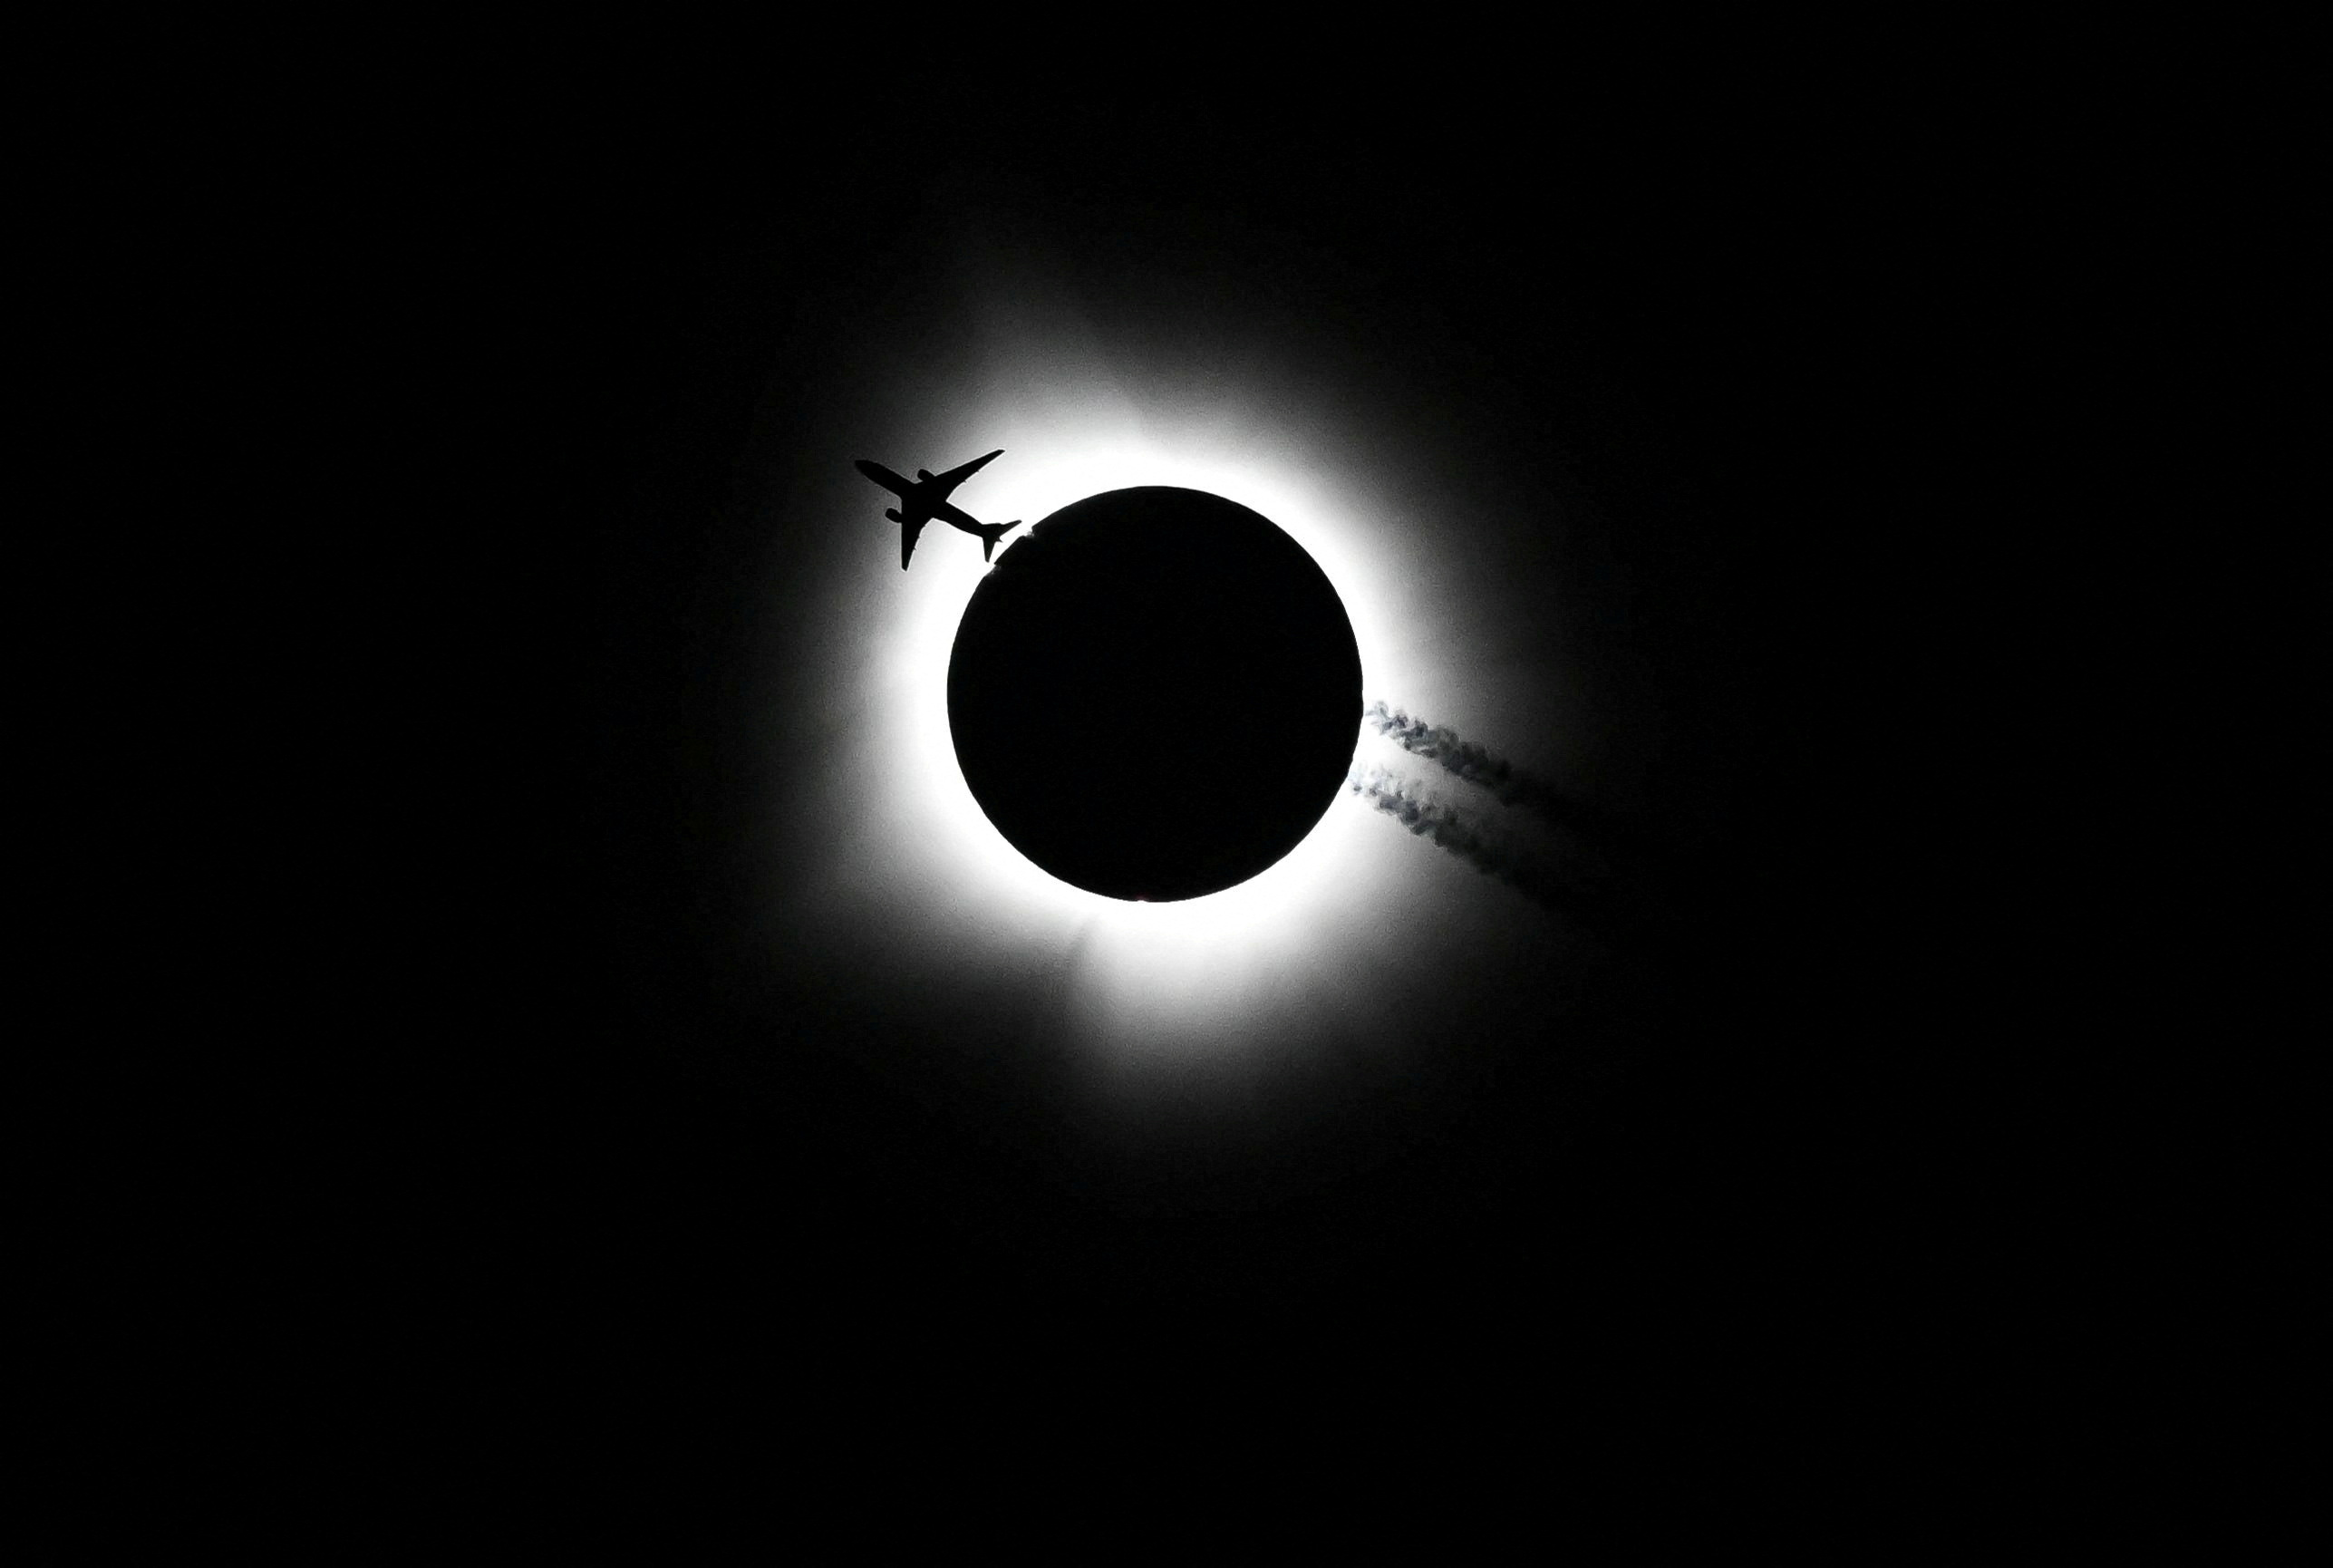 An airplane passes near the total solar eclipse in Bloomington